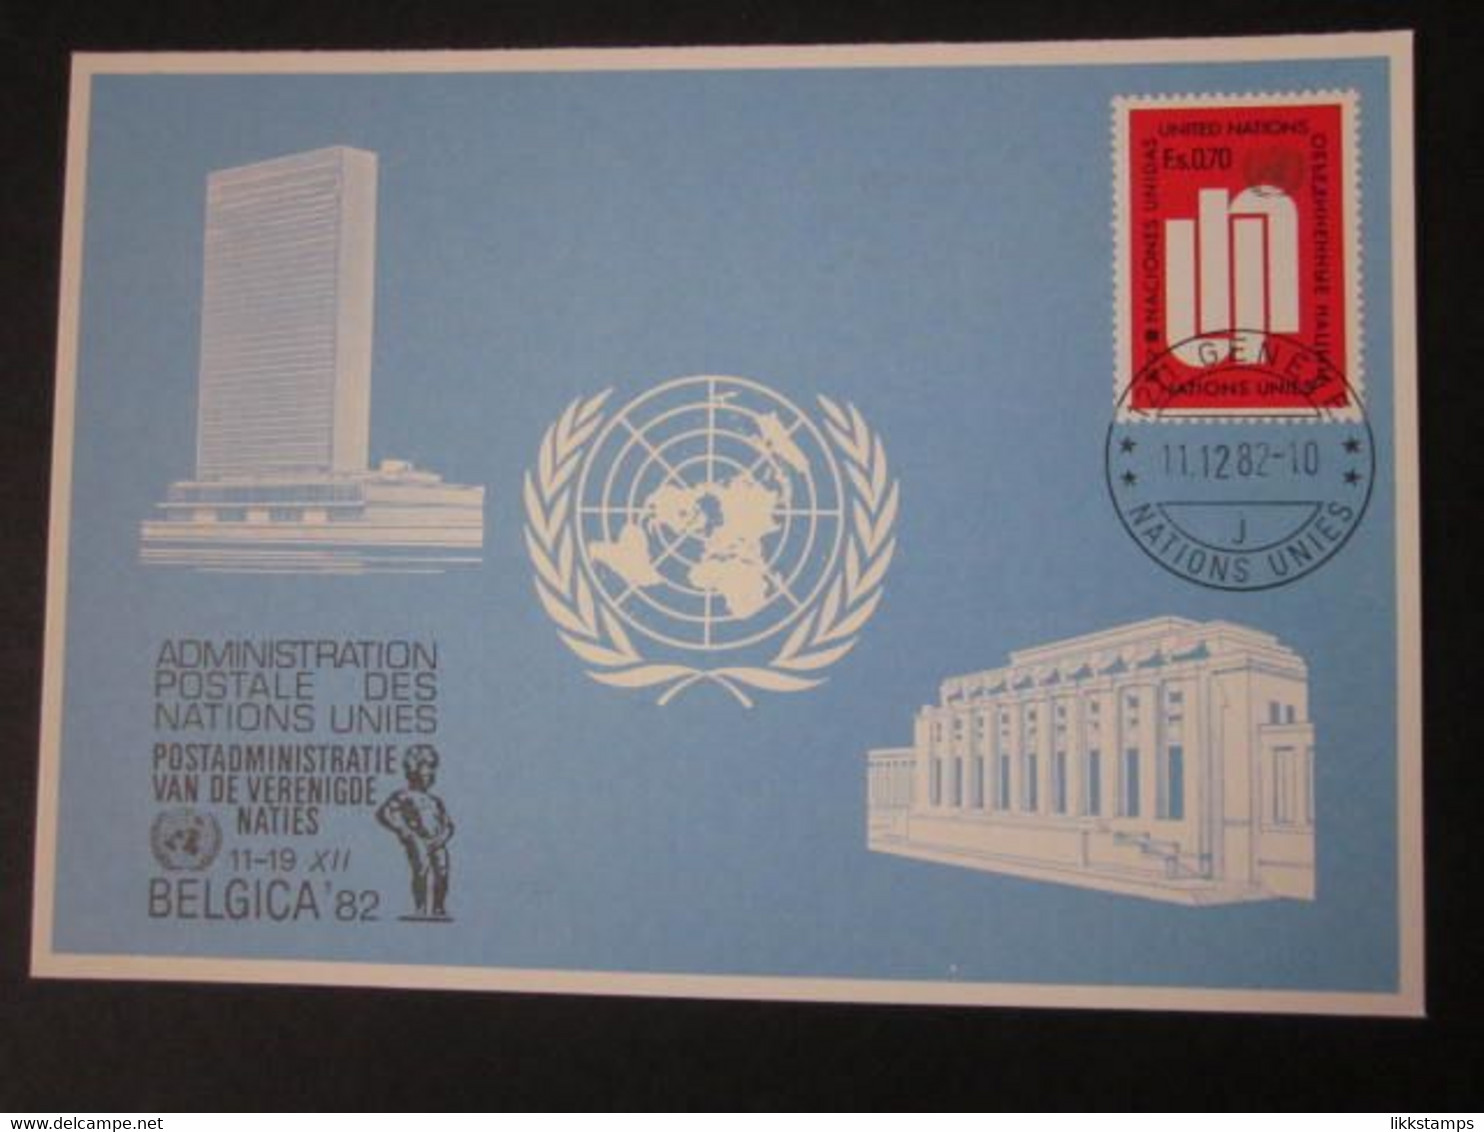 A RARE BELGICA '82 EXHIBITION SOUVENIR CARD WITH FIRST DAY OF EVENT CANCELLATION. ( 02276 ) - Covers & Documents